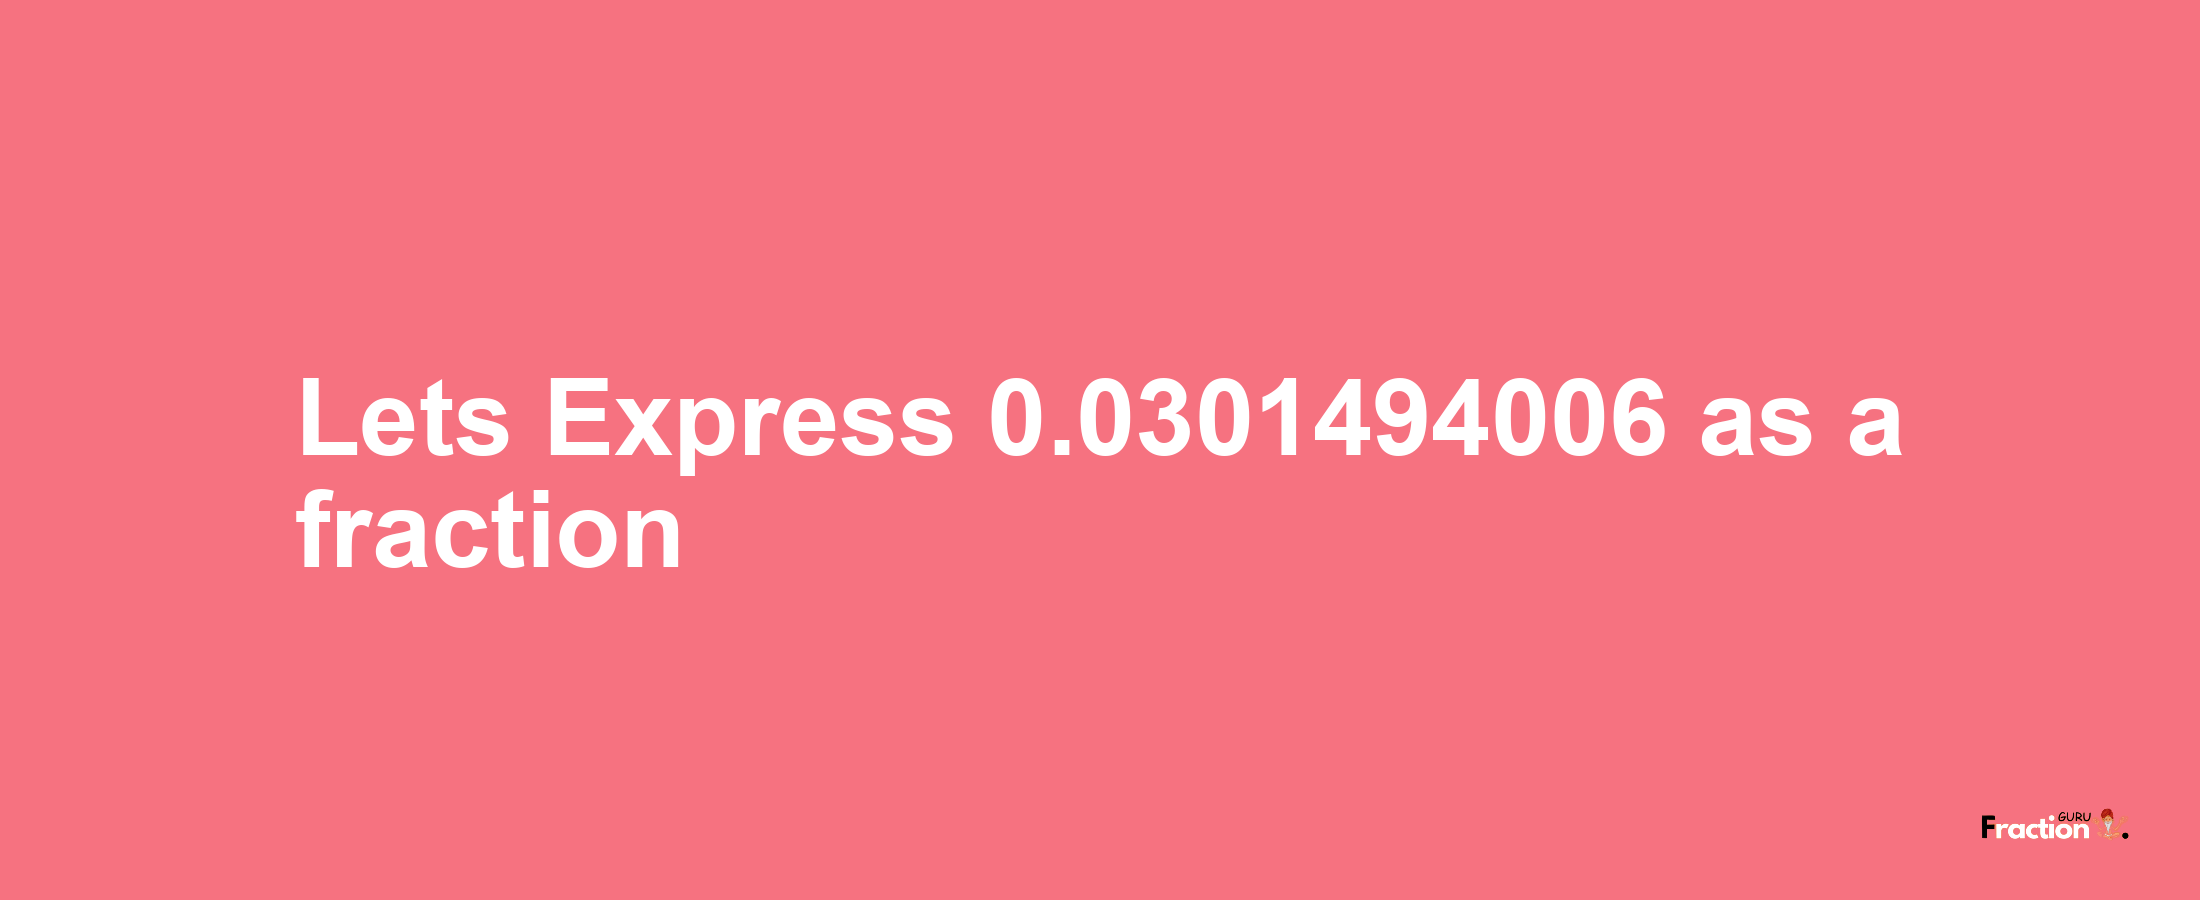 Lets Express 0.0301494006 as afraction